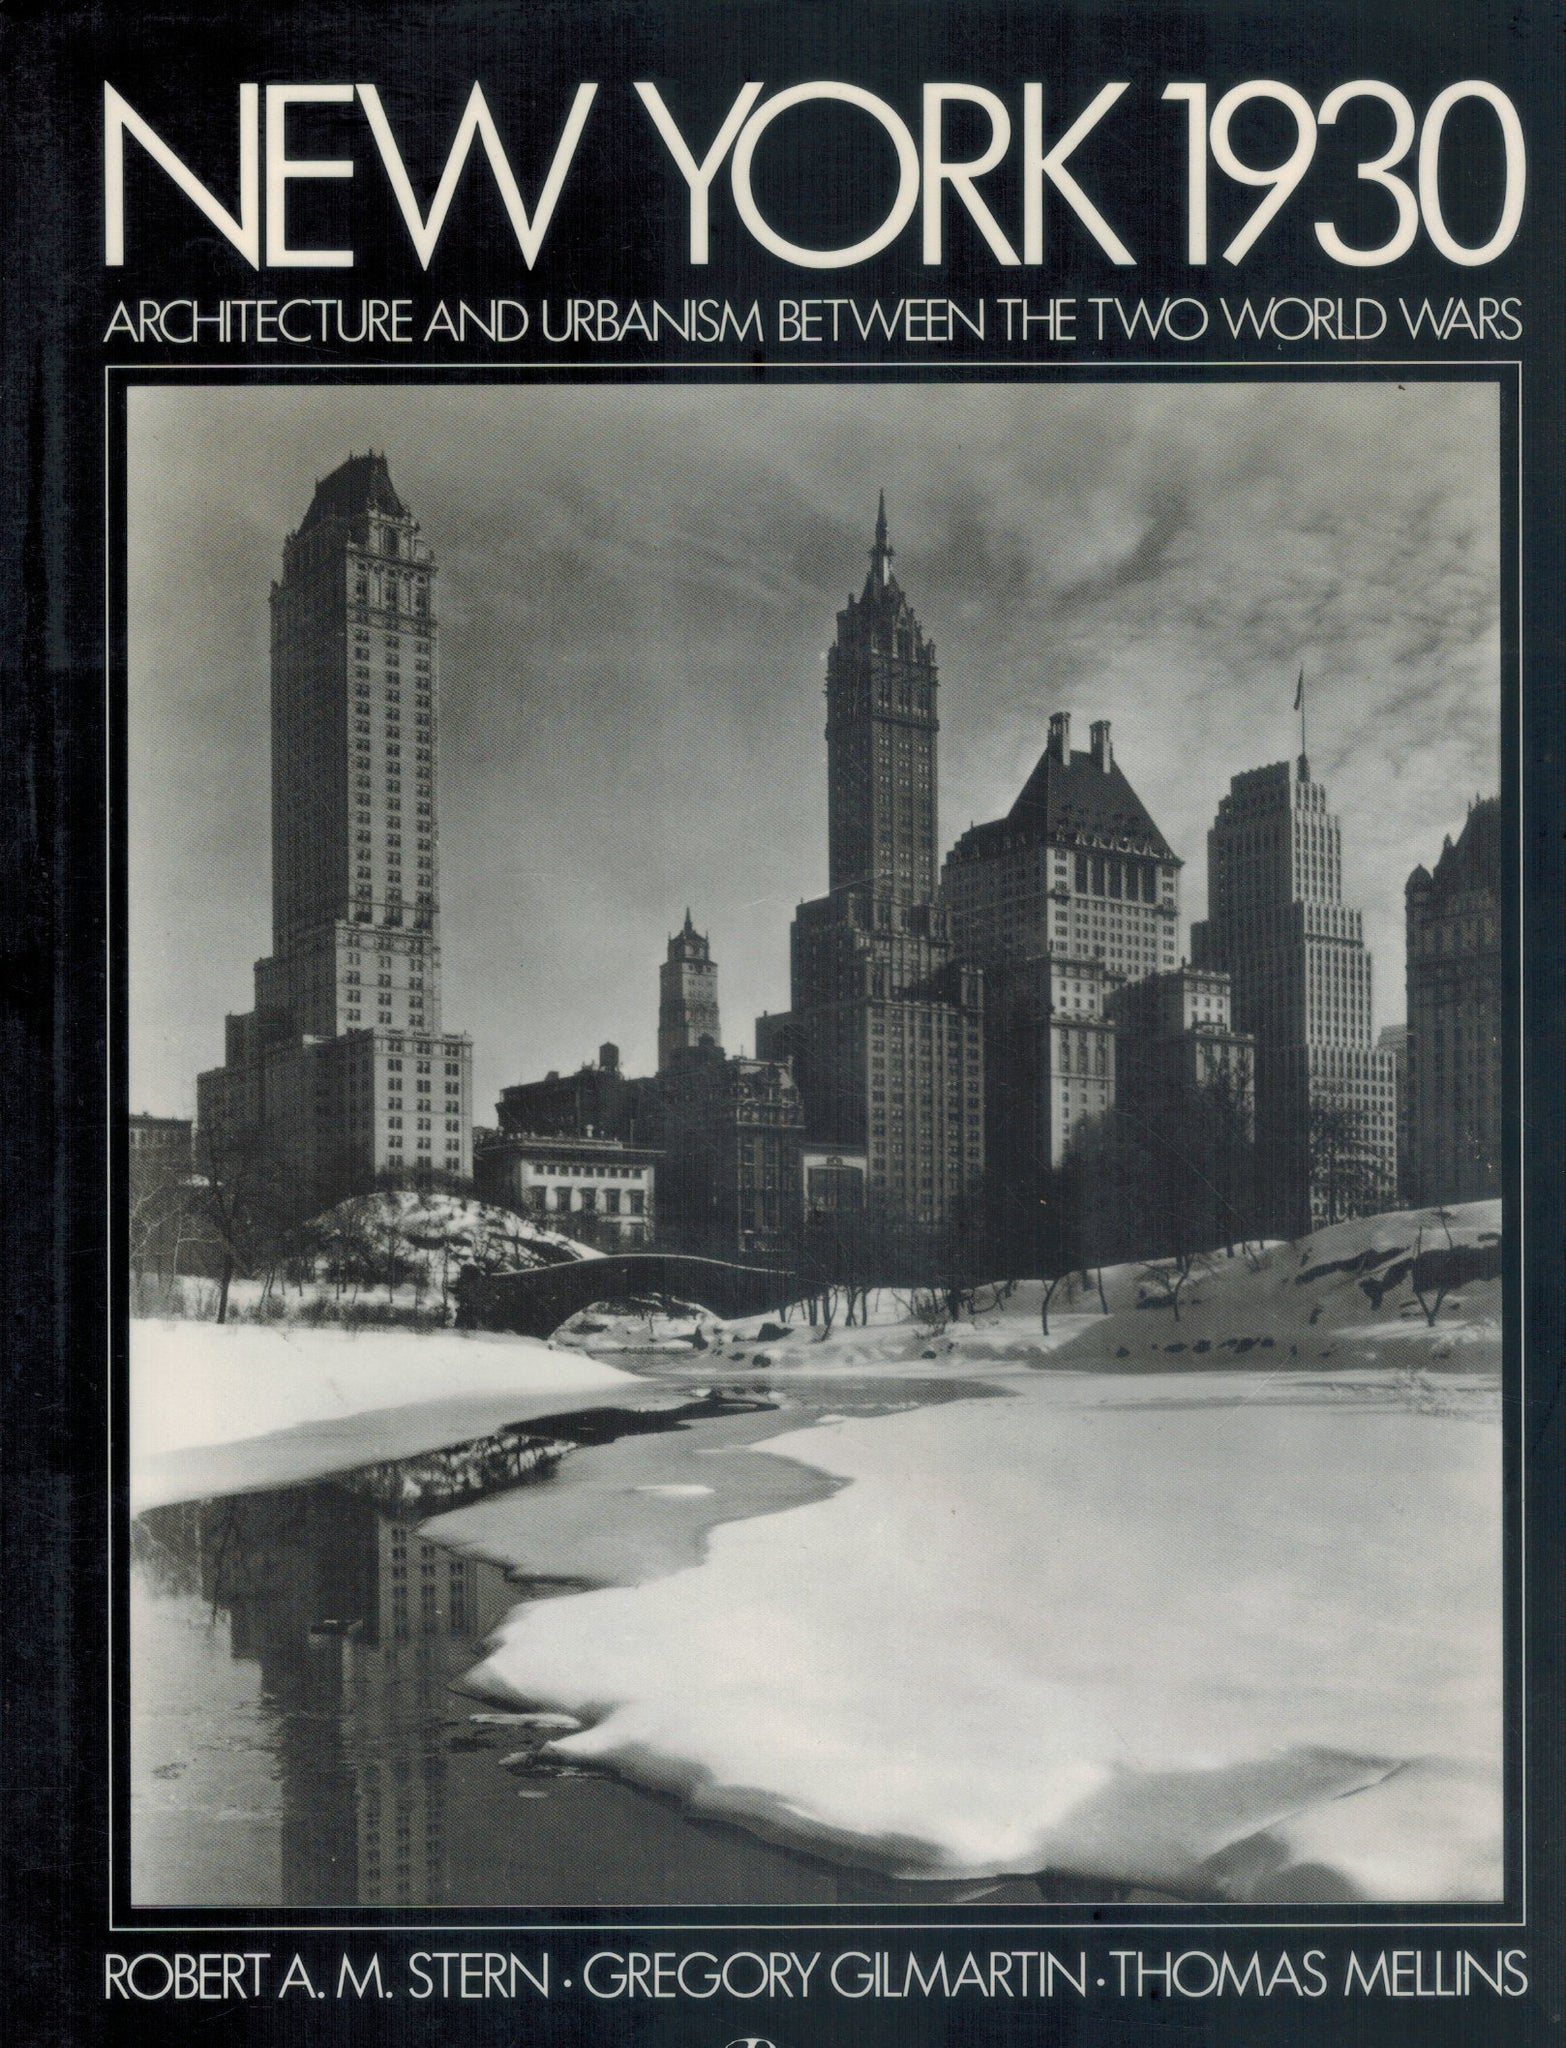 New York 1930 Architecture and Urbanism between the Two World Wars  by Stern, Robert A. M. & Gregory Gilmartin & Thomas Mellins